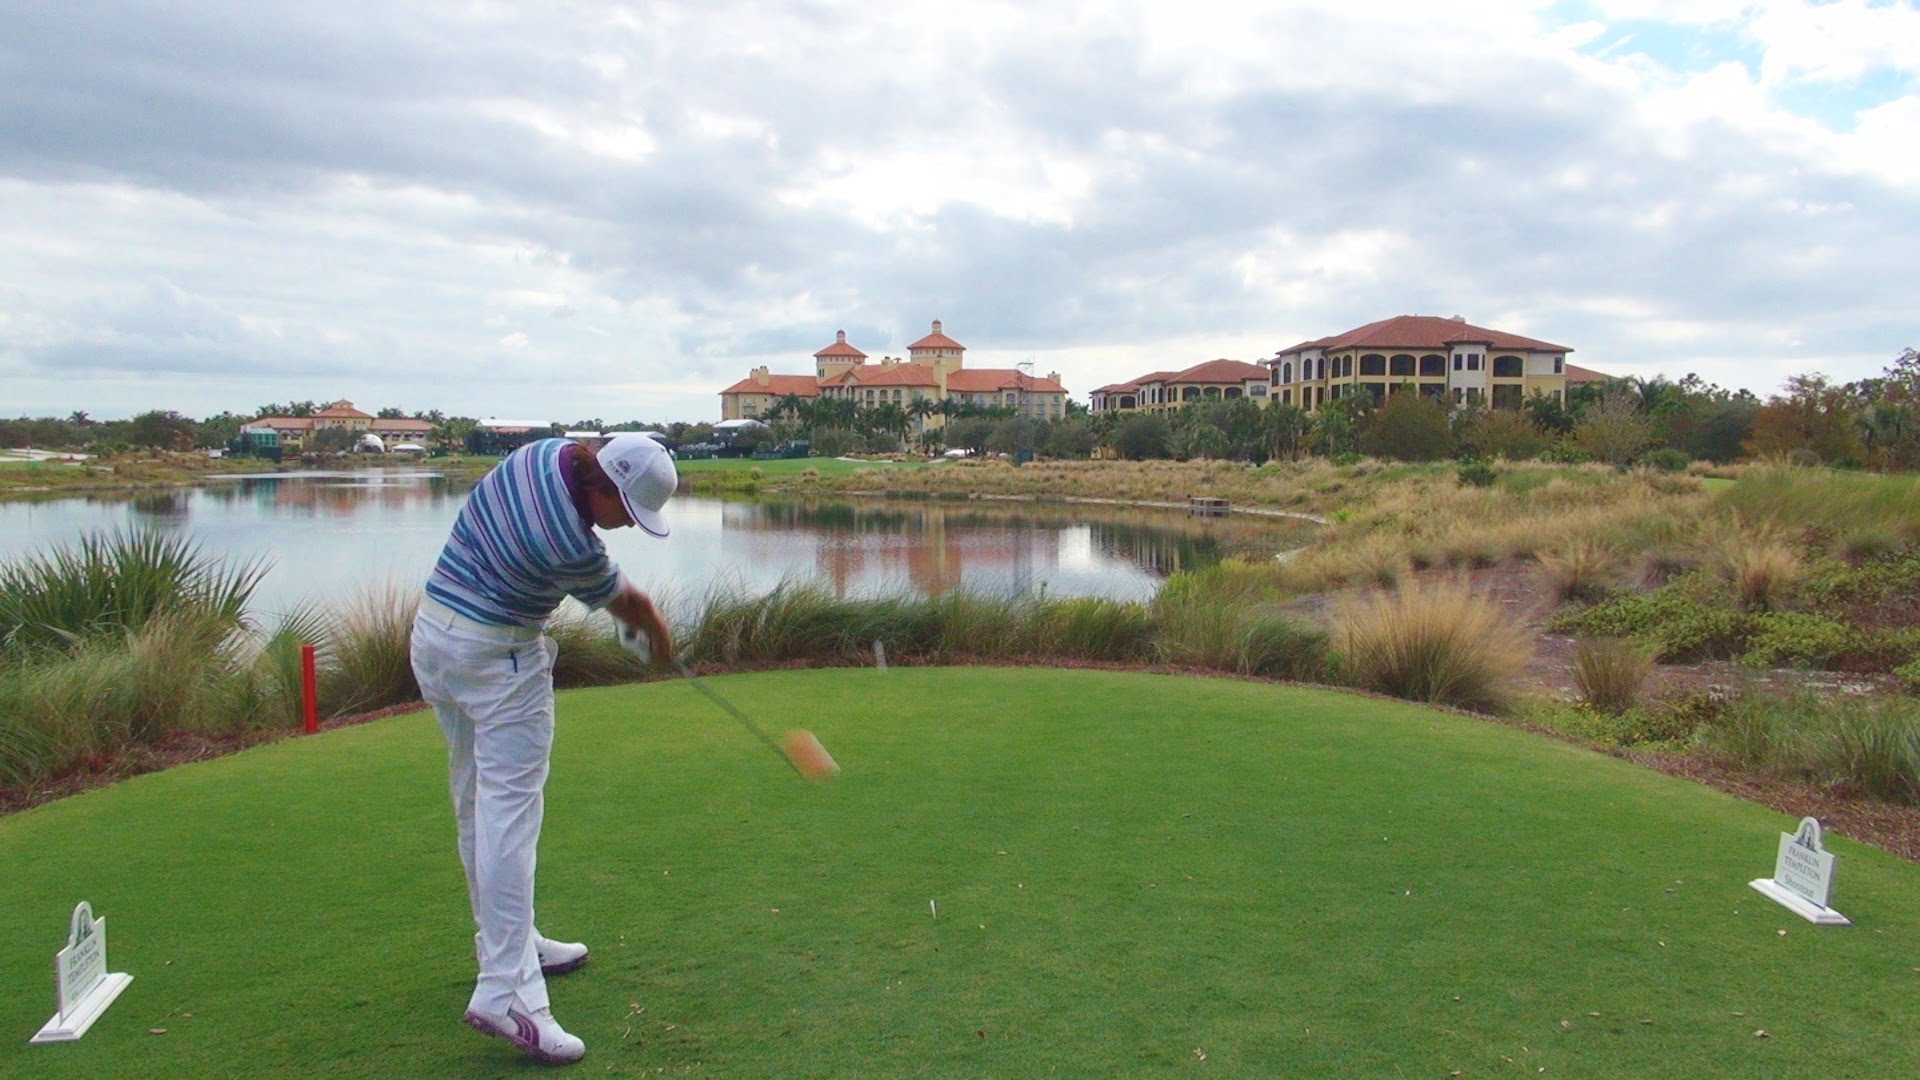 GOLF SWING 2012 - RICKIE FOWLER DRIVER - DTL & SLOW MOTION UP